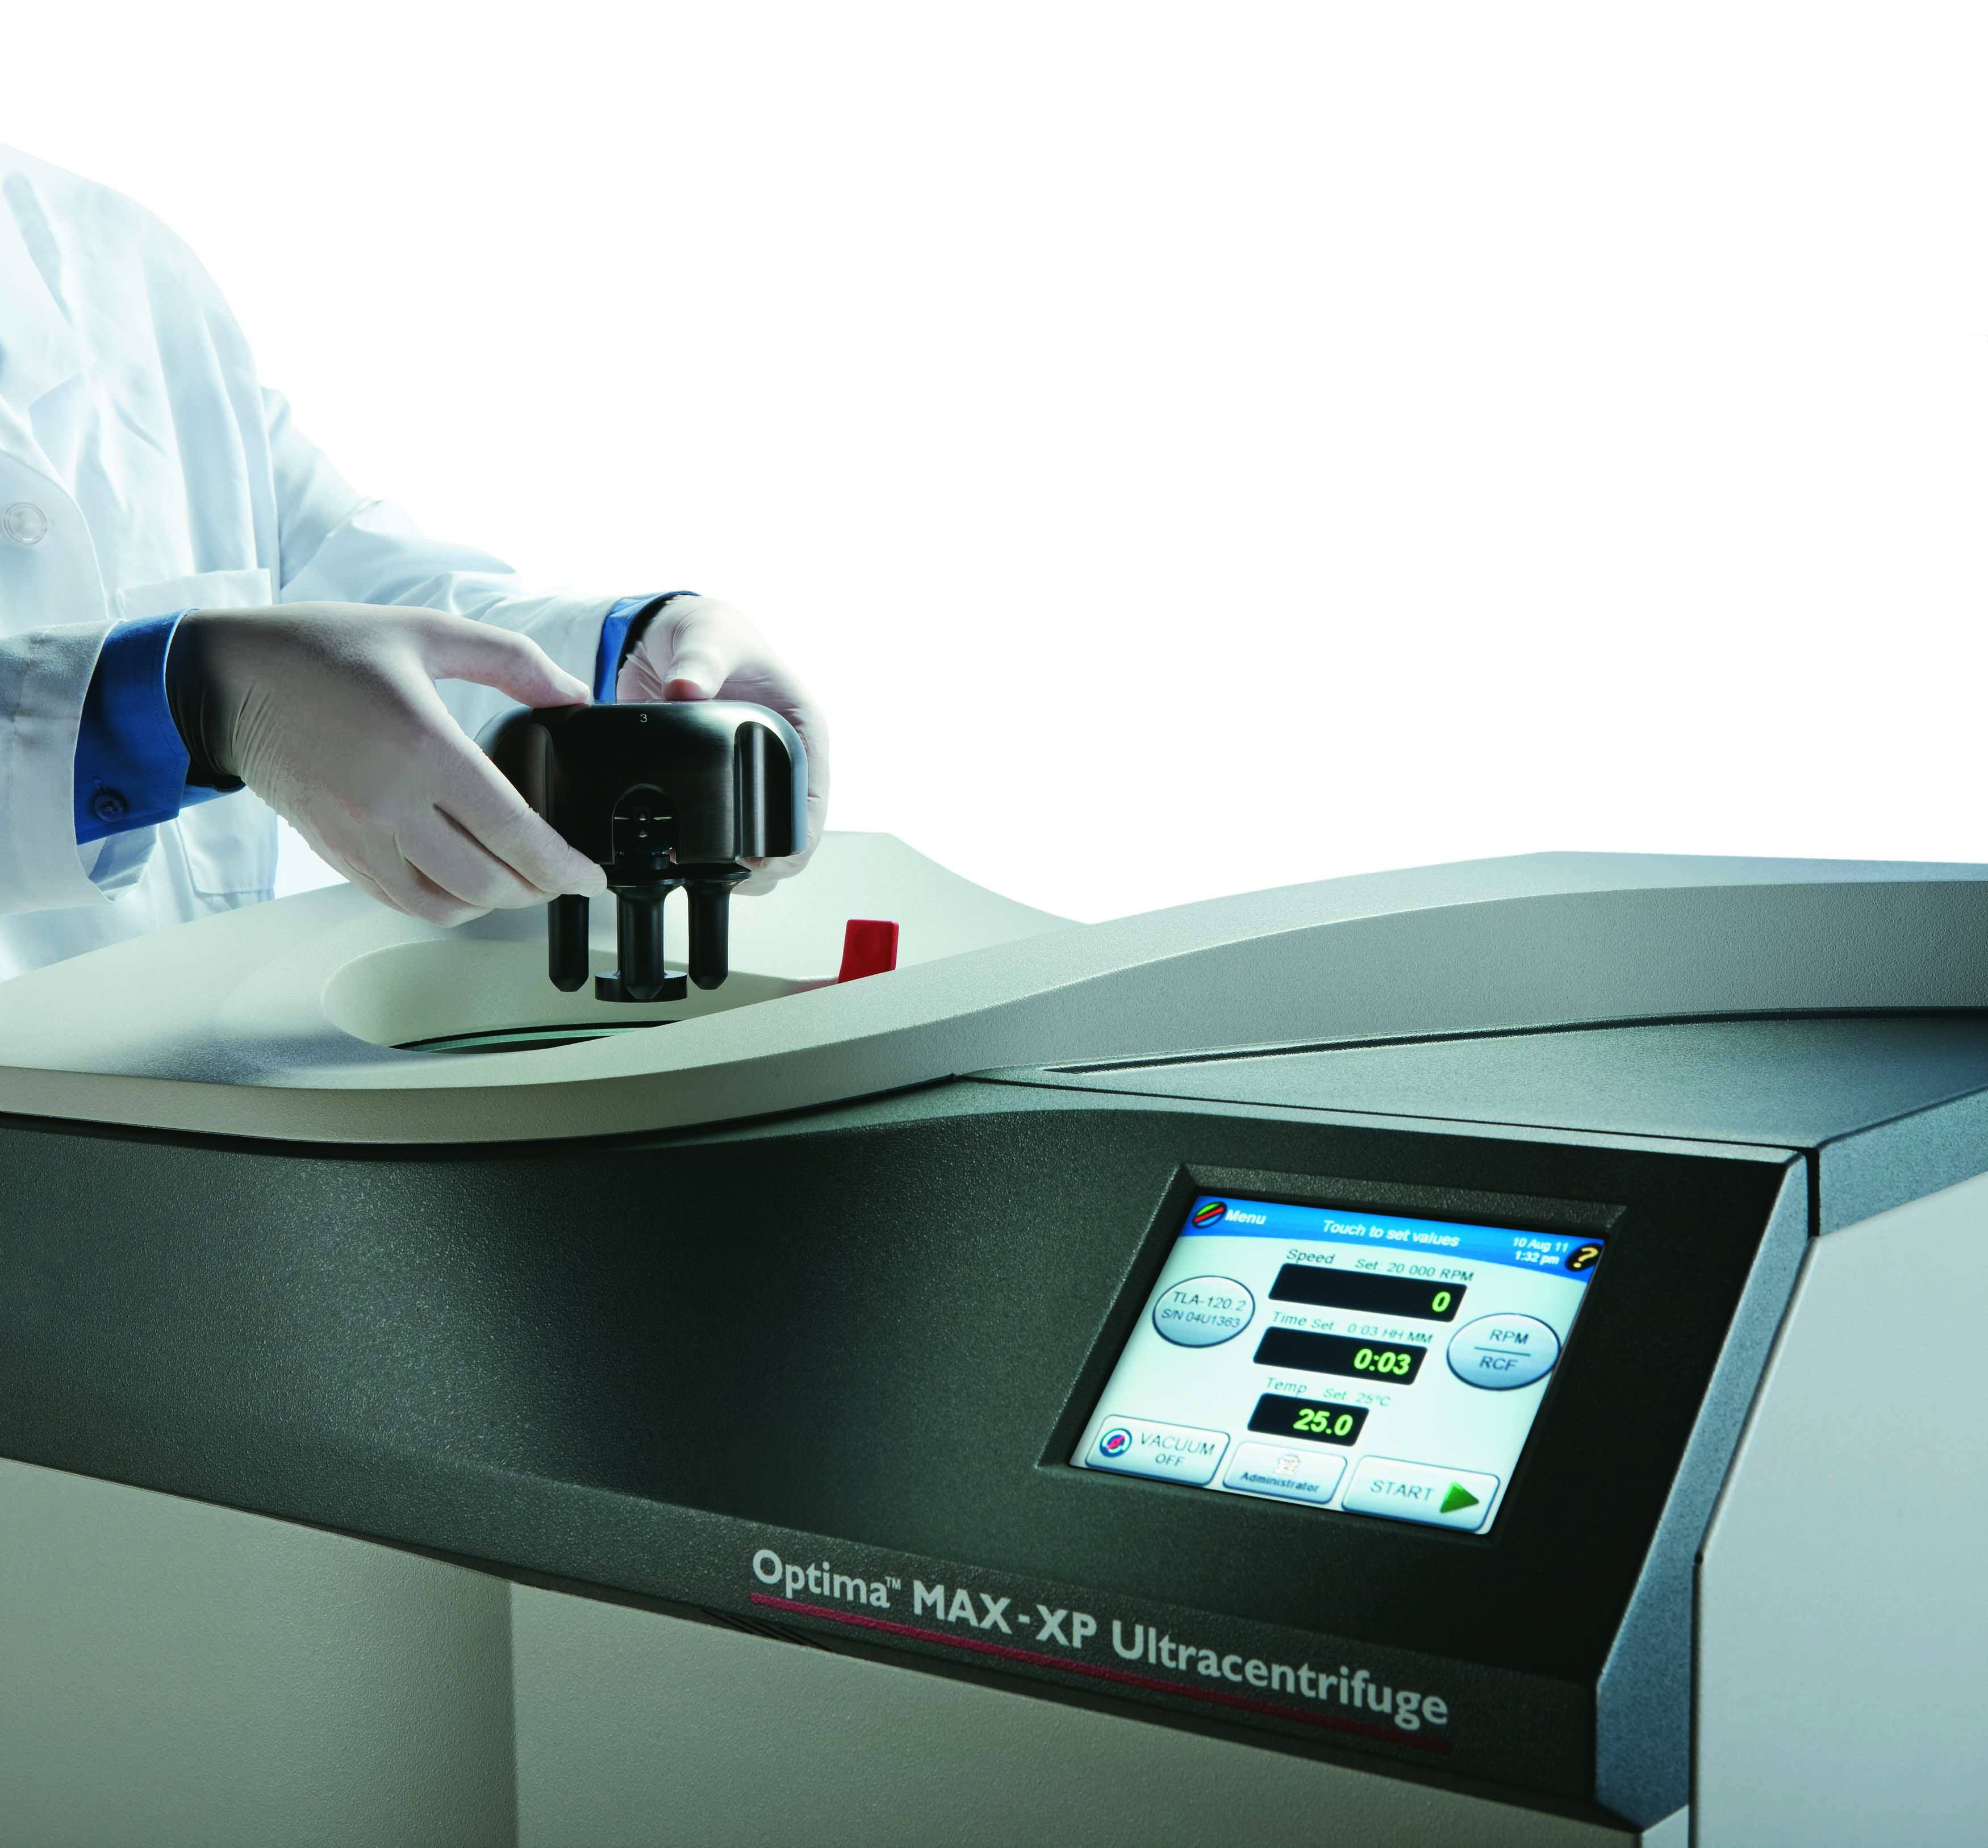 Loading a Rotor in the Optima MAX-XP Benchtop Ultracentrifuge